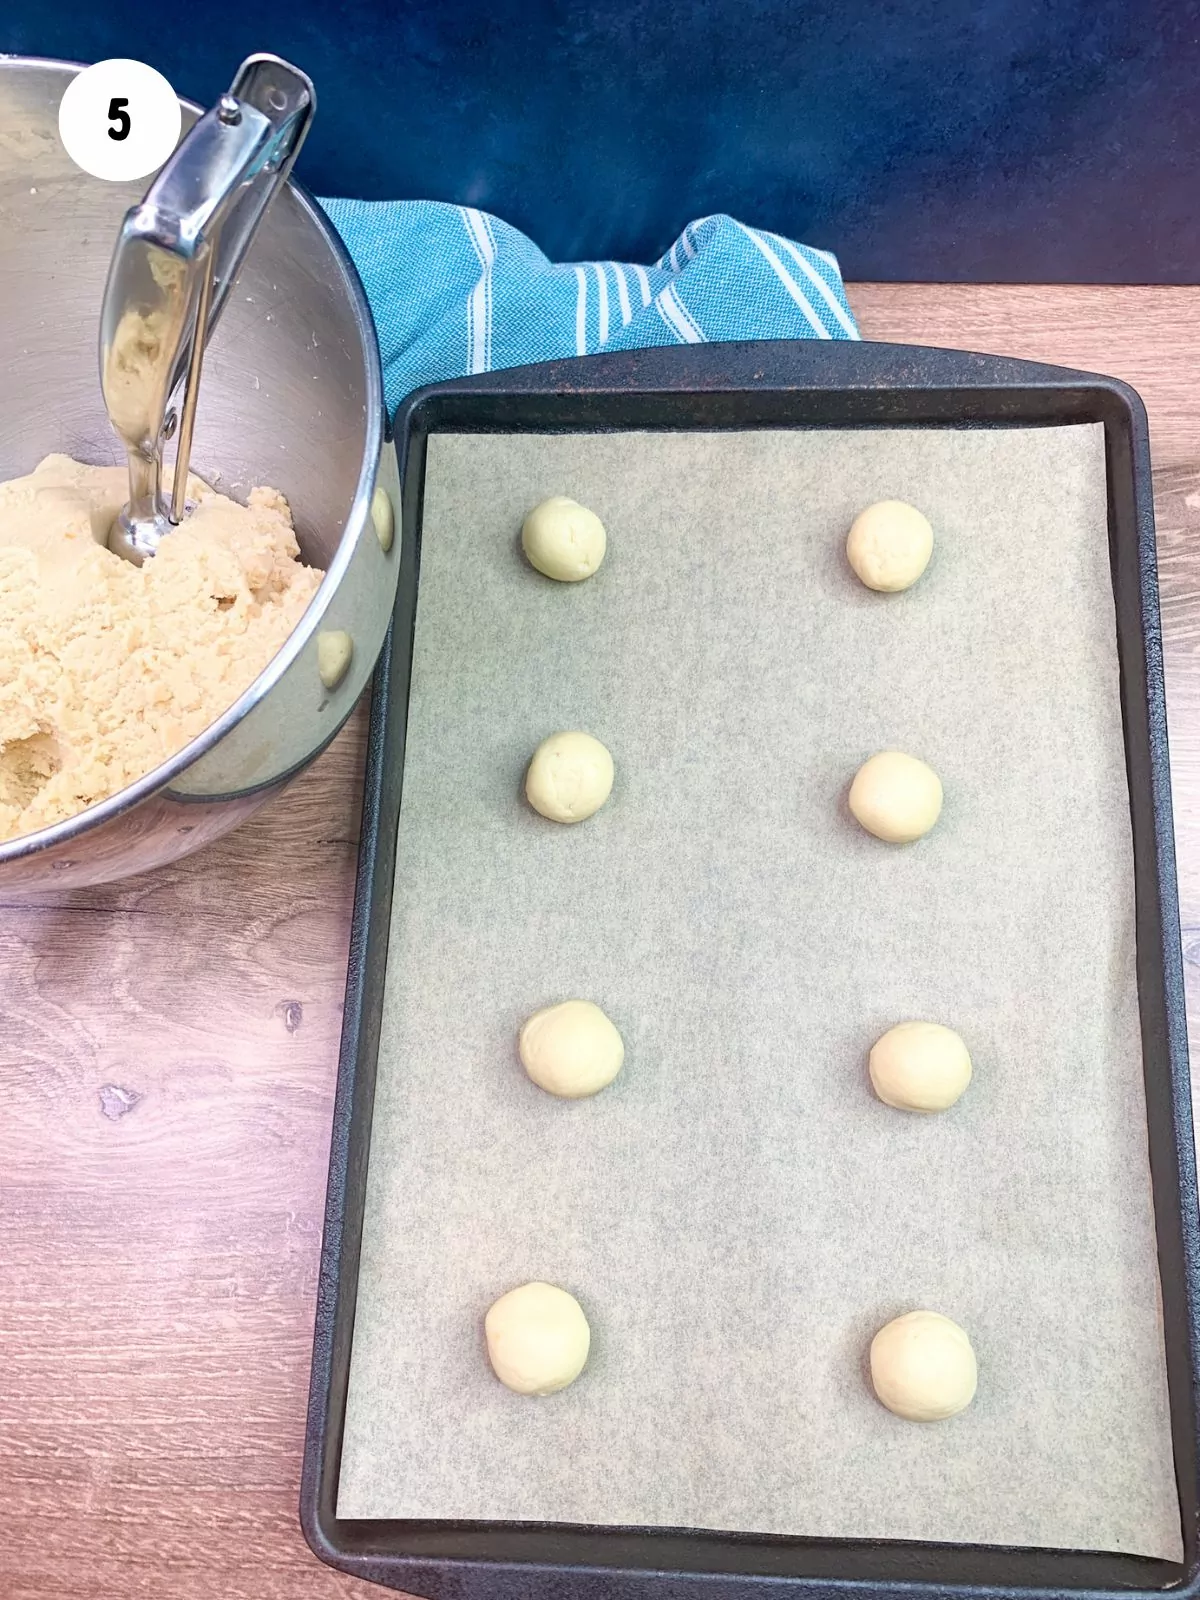 mounds of cookie dough on baking tray with parchment paper.